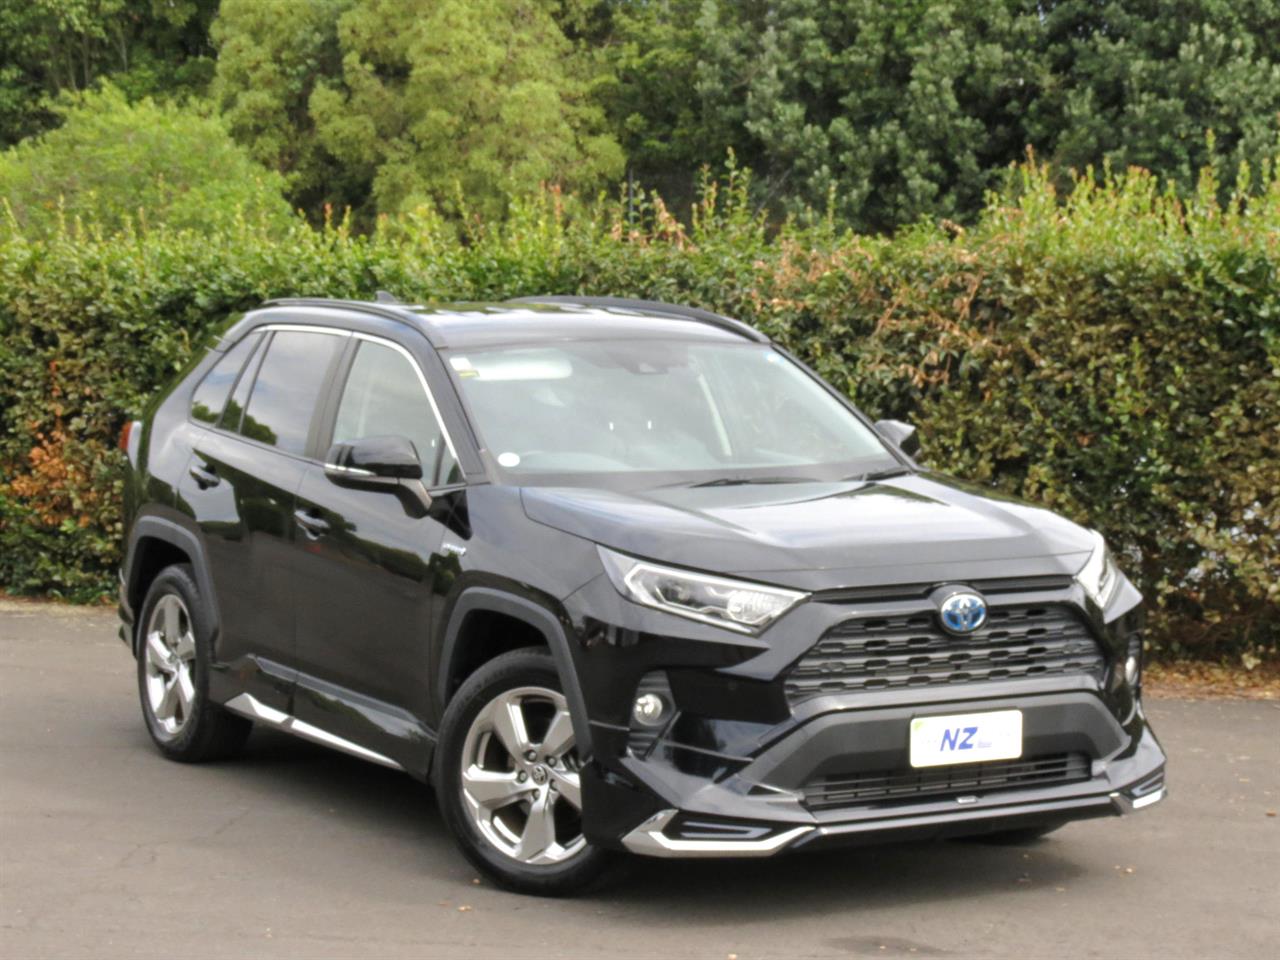 NZC 2019 Toyota RAV4 just arrived to Auckland